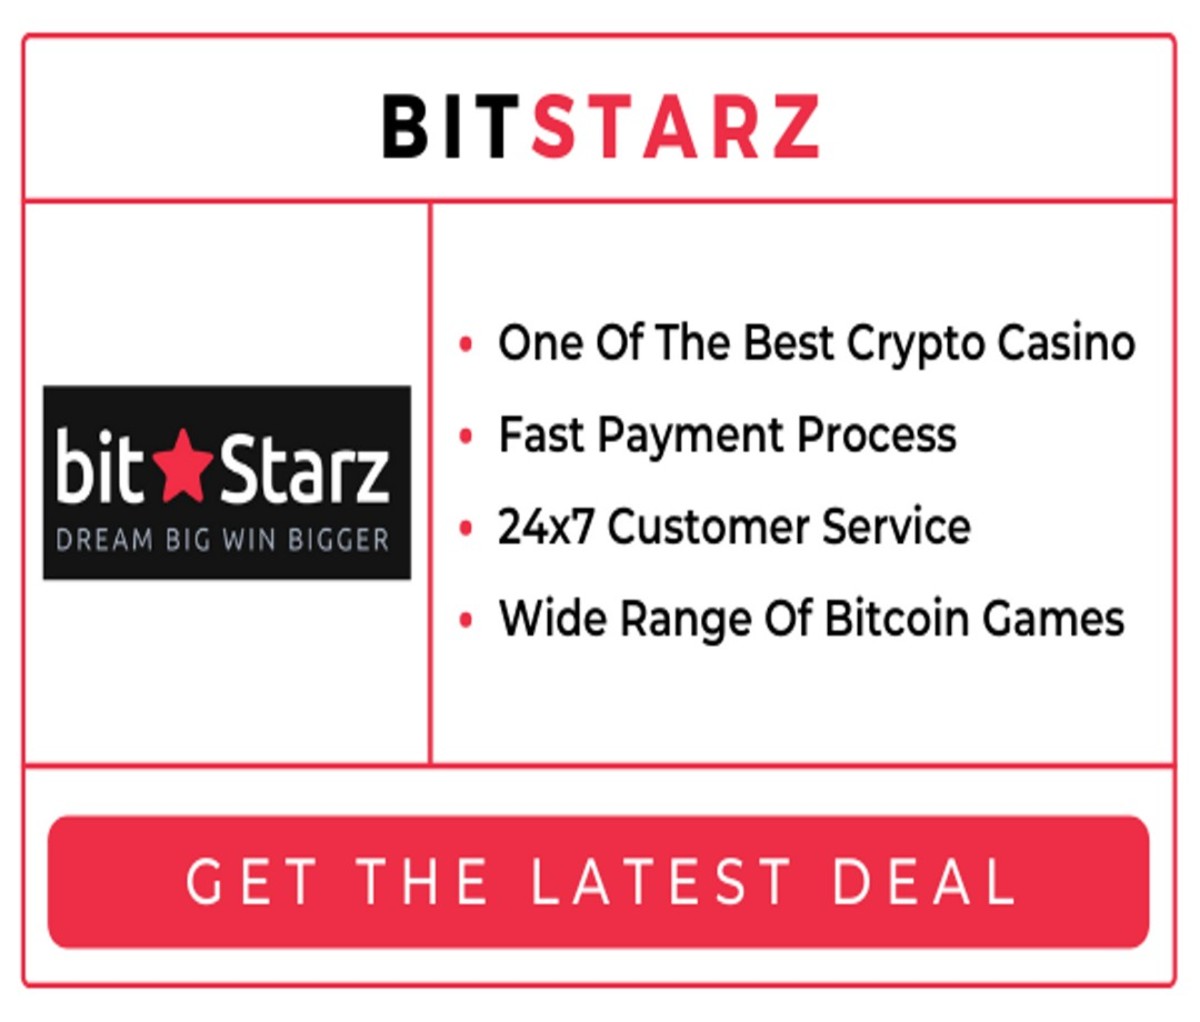 Bitstarz - Top Rated Online Casino Games For High Payouts